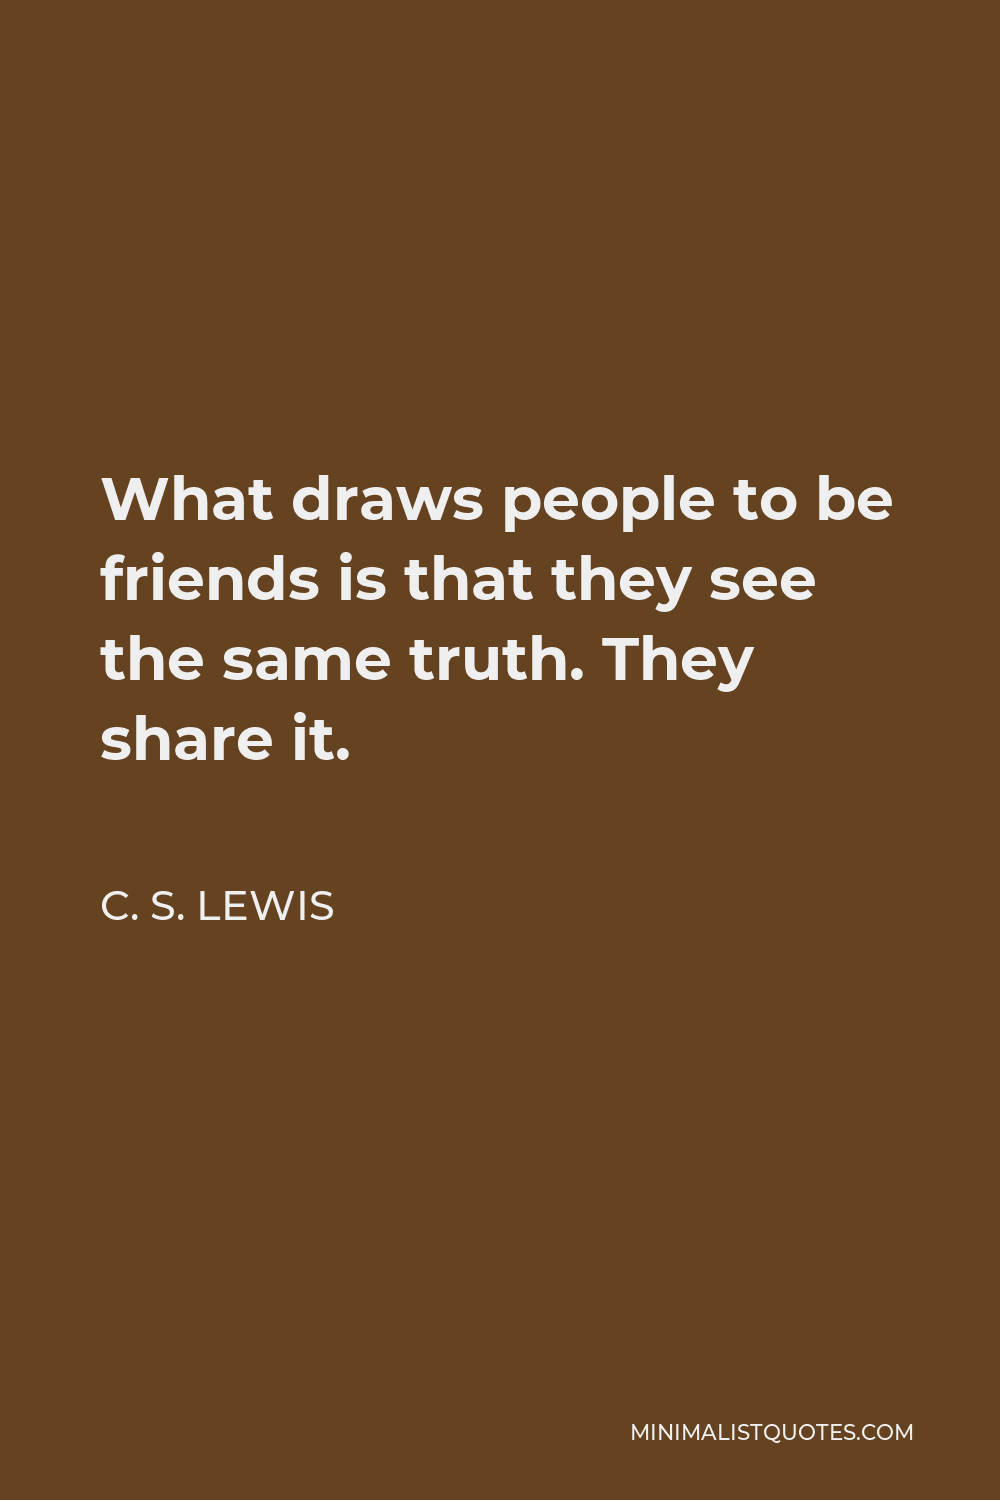 C. S. Lewis Quote - What draws people to be friends is that they see the same truth. They share it.